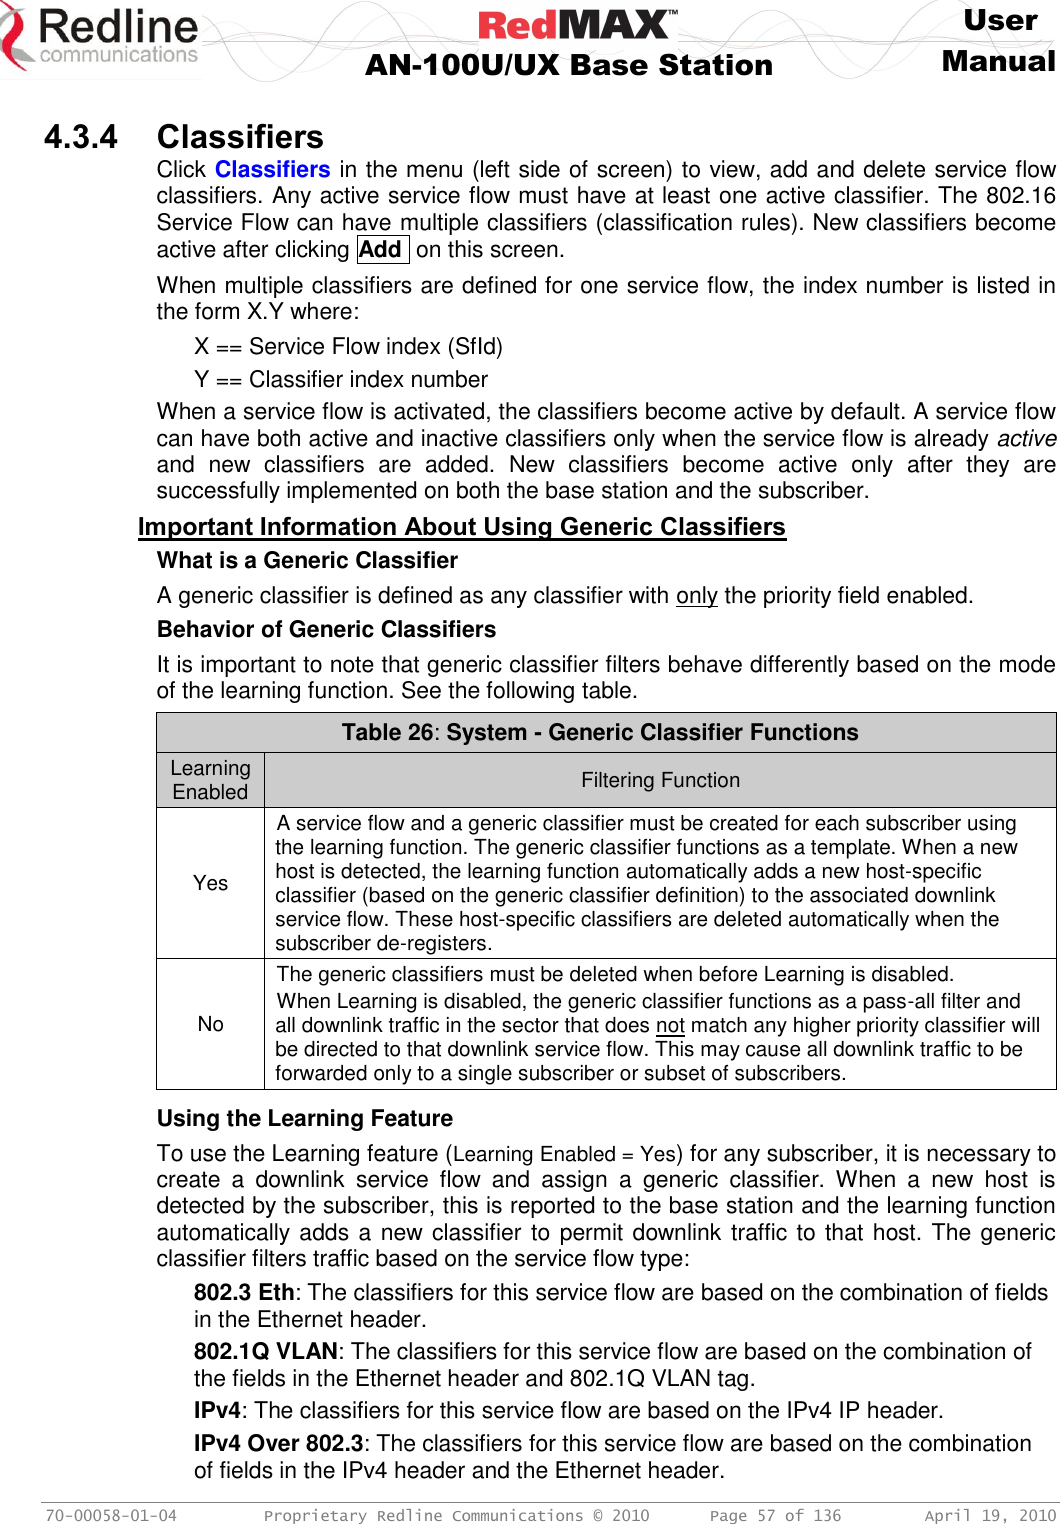     User  AN-100U/UX Base Station Manual   70-00058-01-04  Proprietary Redline Communications © 2010   Page 57 of 136  April 19, 2010  4.3.4 Classifiers Click Classifiers in the menu (left side of screen) to view, add and delete service flow classifiers. Any active service flow must have at least one active classifier. The 802.16 Service Flow can have multiple classifiers (classification rules). New classifiers become active after clicking Add  on this screen. When multiple classifiers are defined for one service flow, the index number is listed in the form X.Y where: X == Service Flow index (SfId) Y == Classifier index number When a service flow is activated, the classifiers become active by default. A service flow can have both active and inactive classifiers only when the service flow is already active and  new  classifiers  are  added.  New  classifiers  become  active  only  after  they  are successfully implemented on both the base station and the subscriber. Important Information About Using Generic Classifiers What is a Generic Classifier A generic classifier is defined as any classifier with only the priority field enabled. Behavior of Generic Classifiers It is important to note that generic classifier filters behave differently based on the mode of the learning function. See the following table. Table 26: System - Generic Classifier Functions Learning Enabled Filtering Function Yes A service flow and a generic classifier must be created for each subscriber using the learning function. The generic classifier functions as a template. When a new host is detected, the learning function automatically adds a new host-specific classifier (based on the generic classifier definition) to the associated downlink service flow. These host-specific classifiers are deleted automatically when the subscriber de-registers. No The generic classifiers must be deleted when before Learning is disabled. When Learning is disabled, the generic classifier functions as a pass-all filter and all downlink traffic in the sector that does not match any higher priority classifier will be directed to that downlink service flow. This may cause all downlink traffic to be forwarded only to a single subscriber or subset of subscribers.  Using the Learning Feature To use the Learning feature (Learning Enabled = Yes) for any subscriber, it is necessary to create  a  downlink  service  flow  and  assign  a  generic  classifier.  When  a  new  host  is detected by the subscriber, this is reported to the base station and the learning function automatically adds a new classifier to permit downlink traffic to that host. The generic classifier filters traffic based on the service flow type: 802.3 Eth: The classifiers for this service flow are based on the combination of fields in the Ethernet header. 802.1Q VLAN: The classifiers for this service flow are based on the combination of the fields in the Ethernet header and 802.1Q VLAN tag. IPv4: The classifiers for this service flow are based on the IPv4 IP header. IPv4 Over 802.3: The classifiers for this service flow are based on the combination of fields in the IPv4 header and the Ethernet header. 